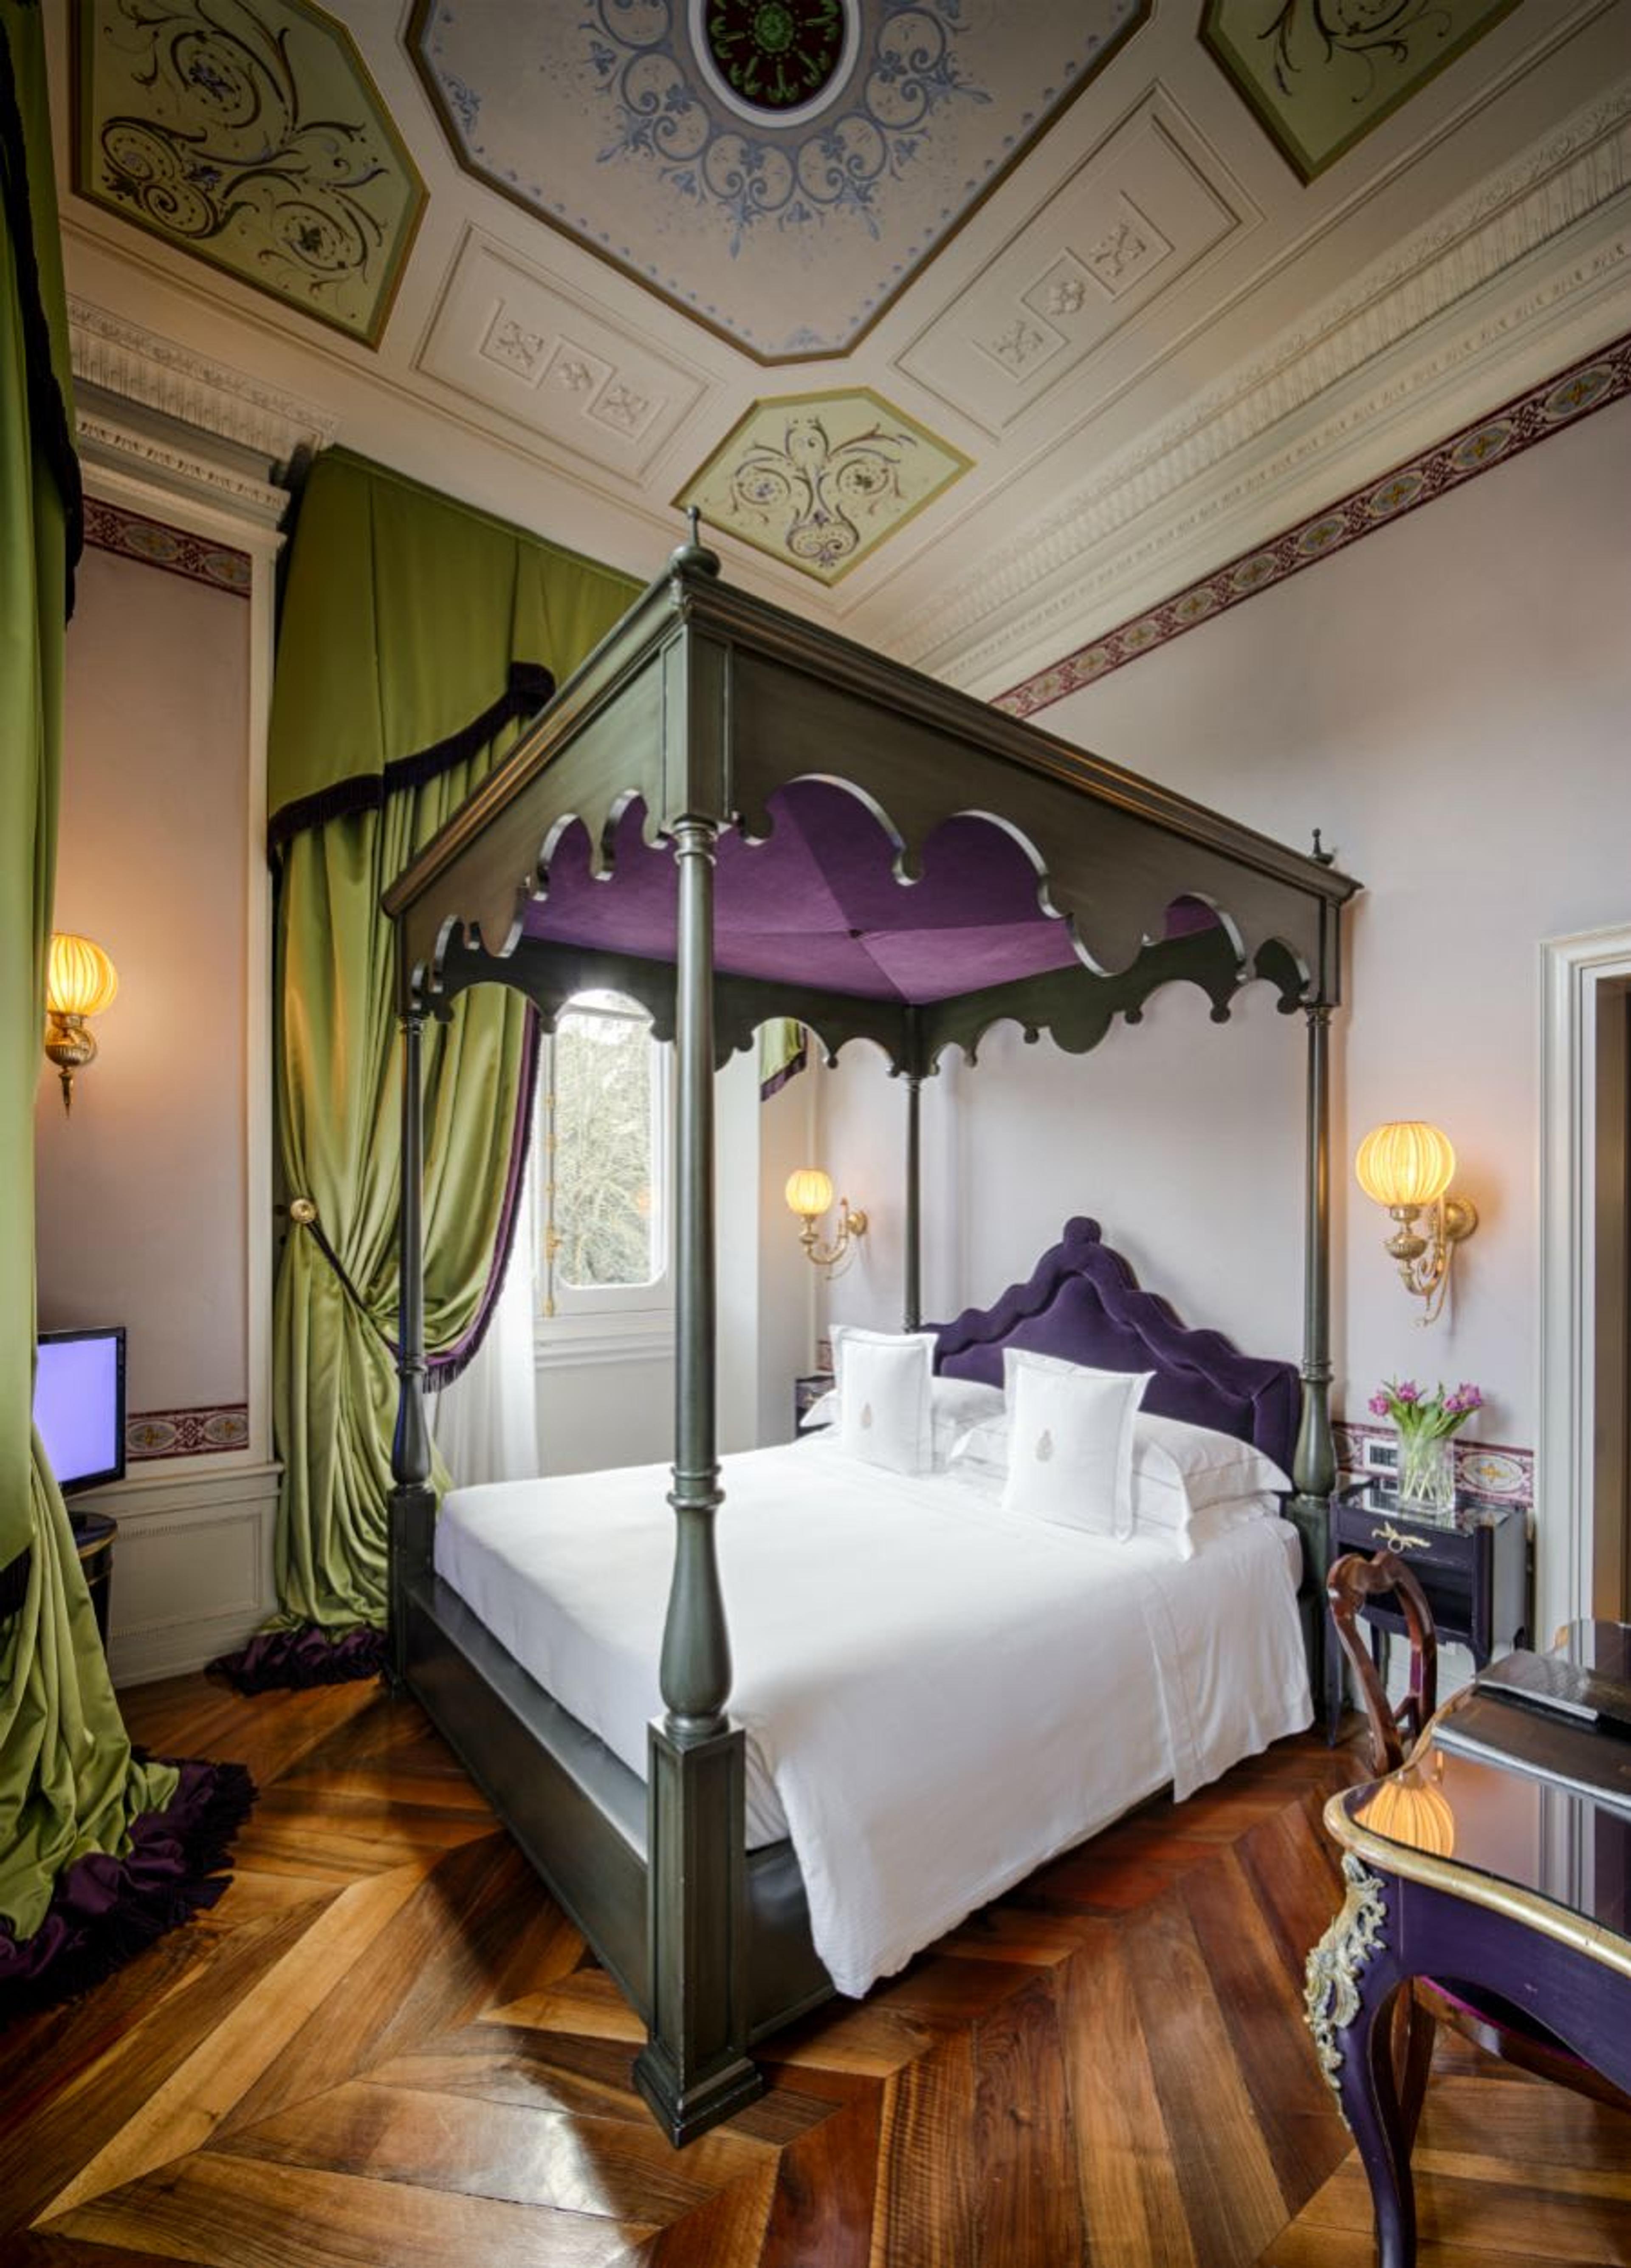 View of an elegant suite on the tones of green and purple with a regal four-poster bed and precious frescoes.